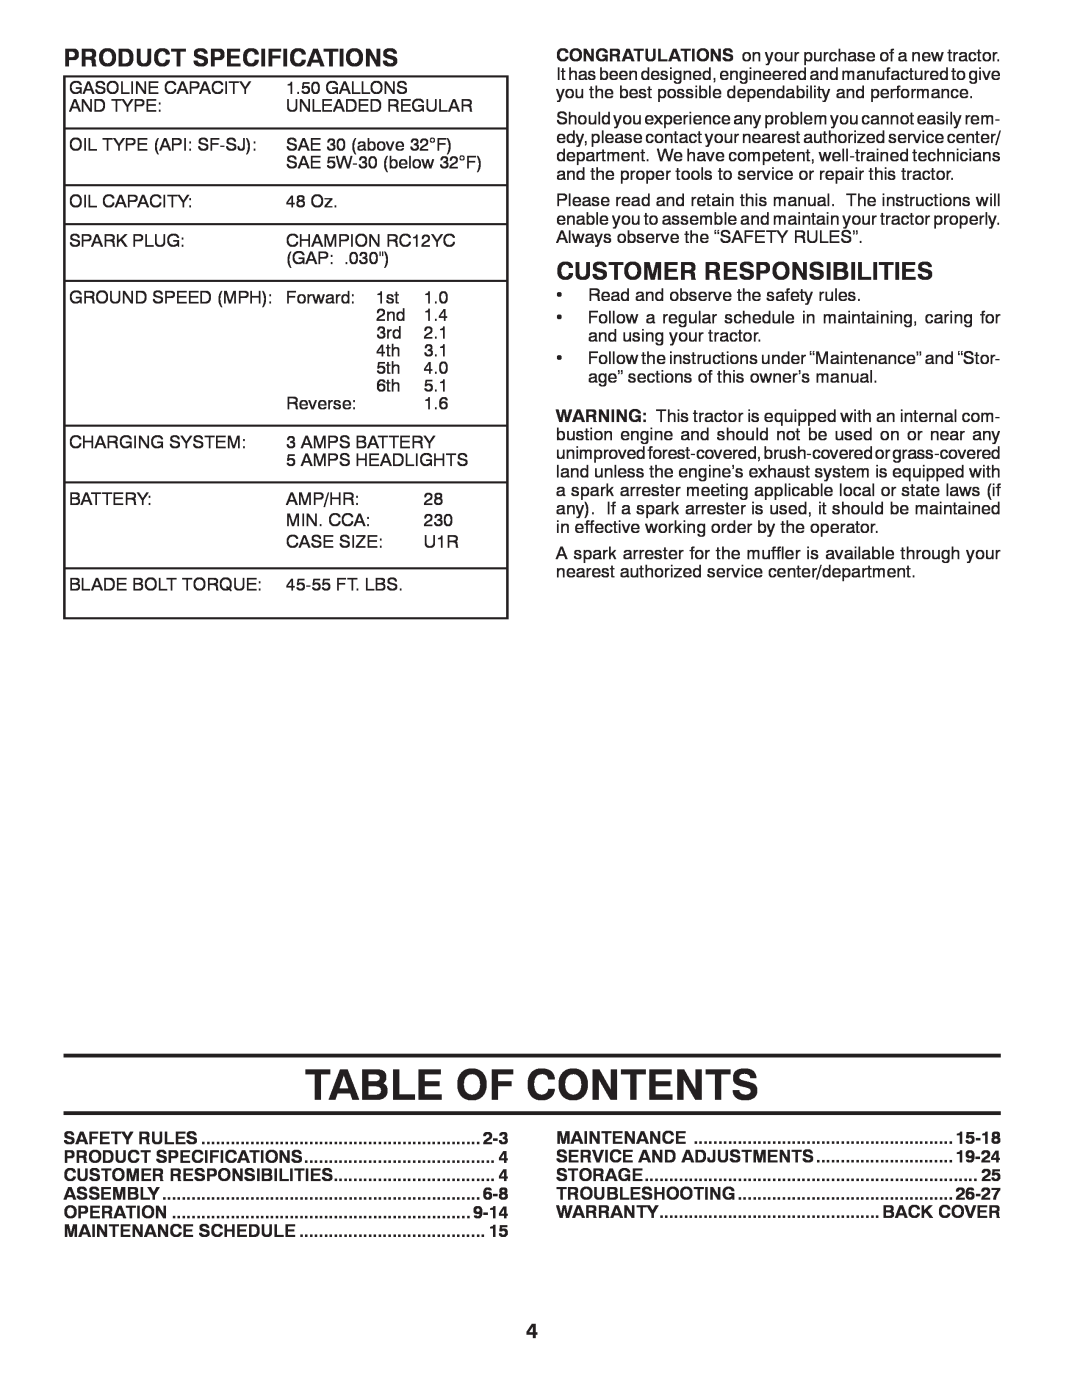 McCulloch 96041011600 manual Table Of Contents, Product Specifications, Customer Responsibilities 